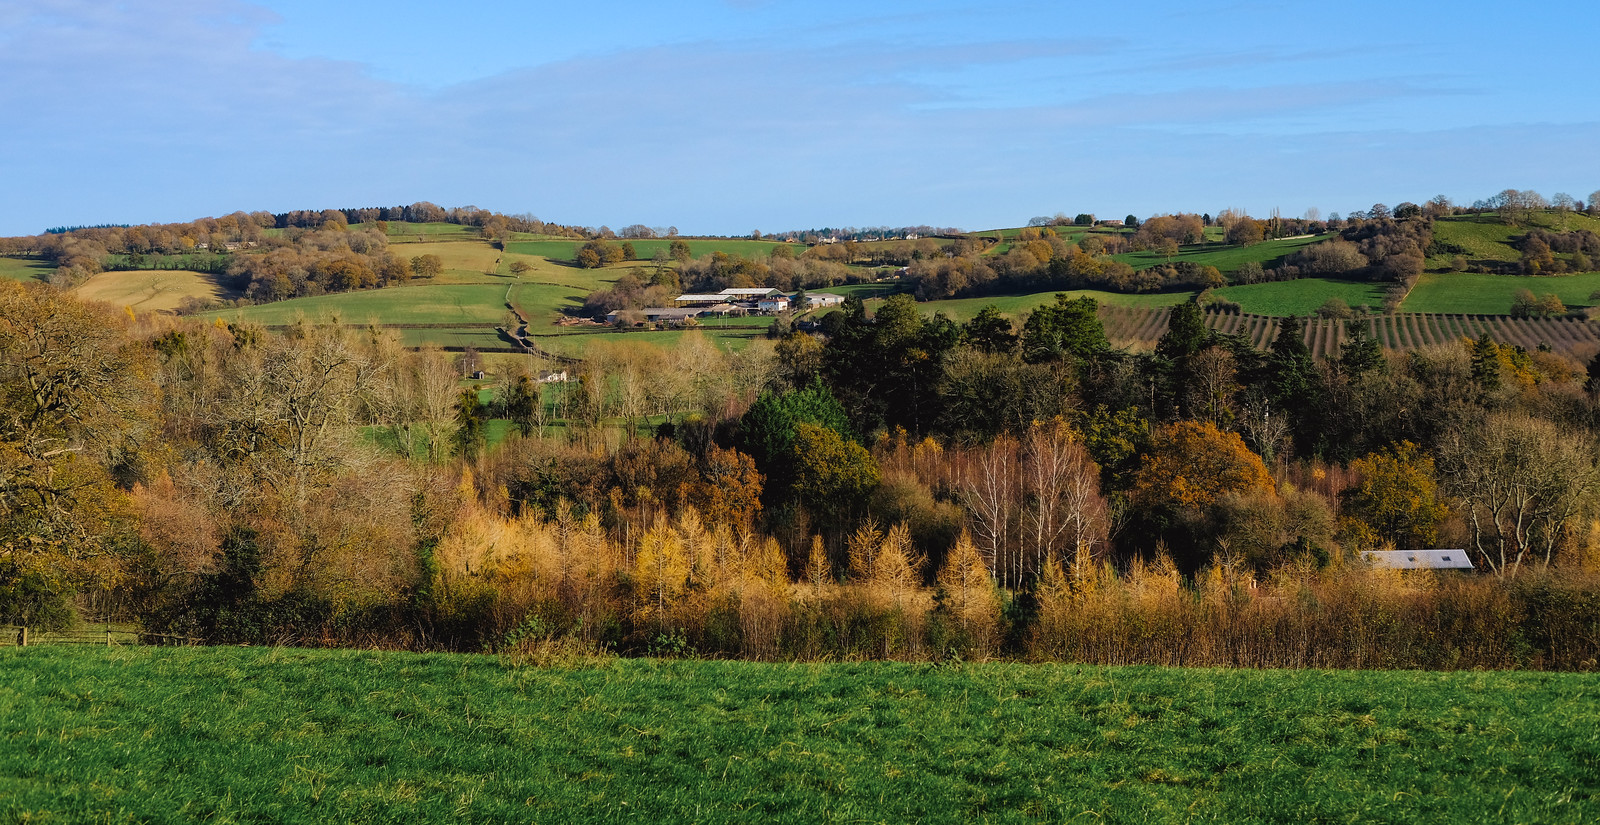 A view across a short green field at a hill rising up to the blue sky, covered in autumn trees in various shades of brown and green